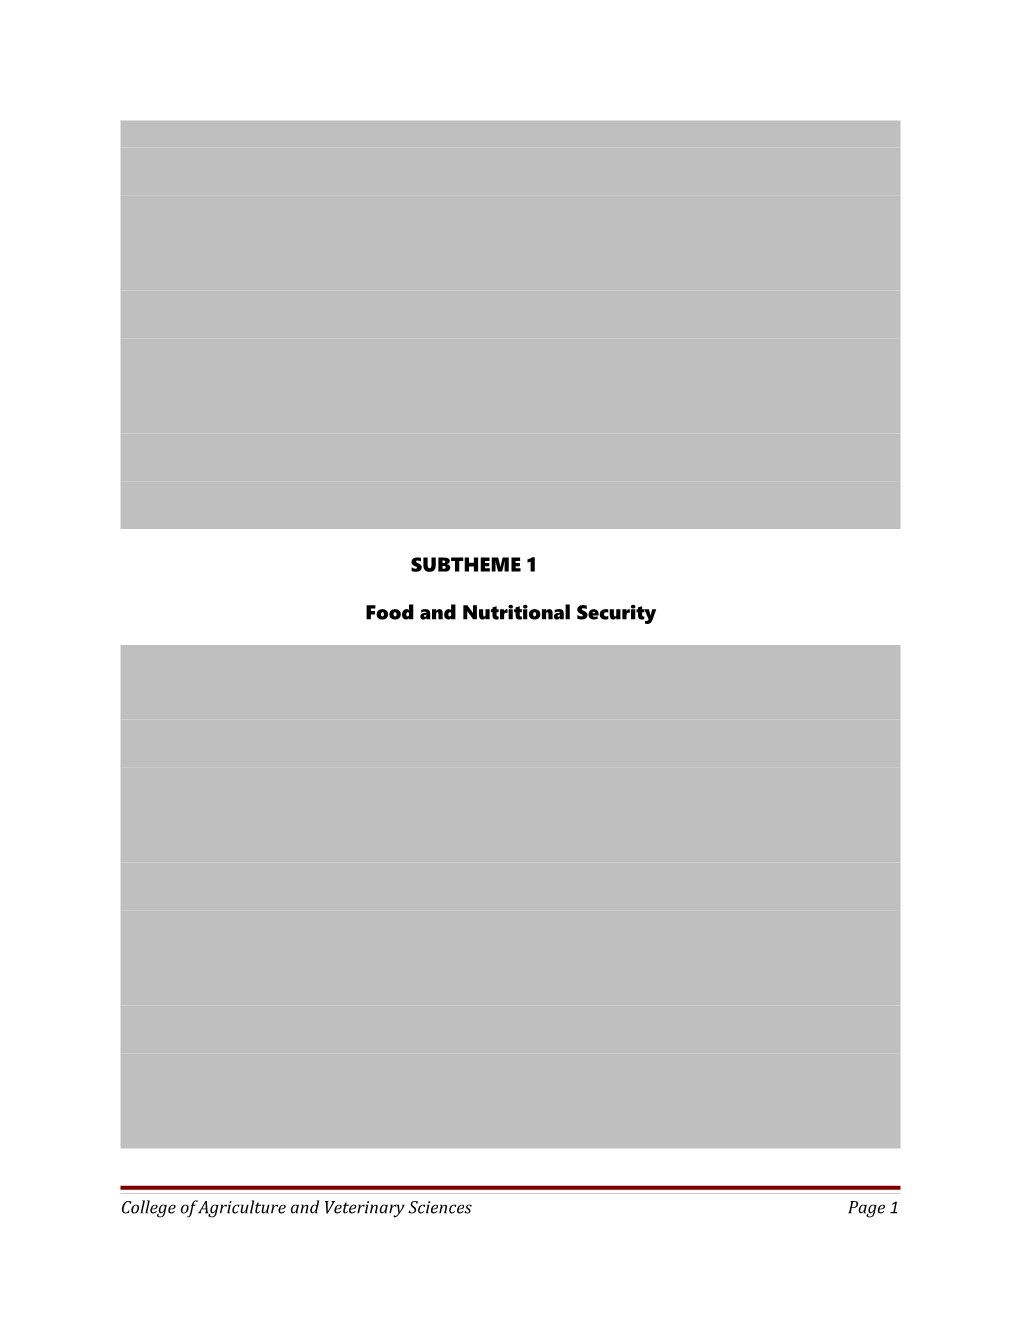 Food and Nutritional Security